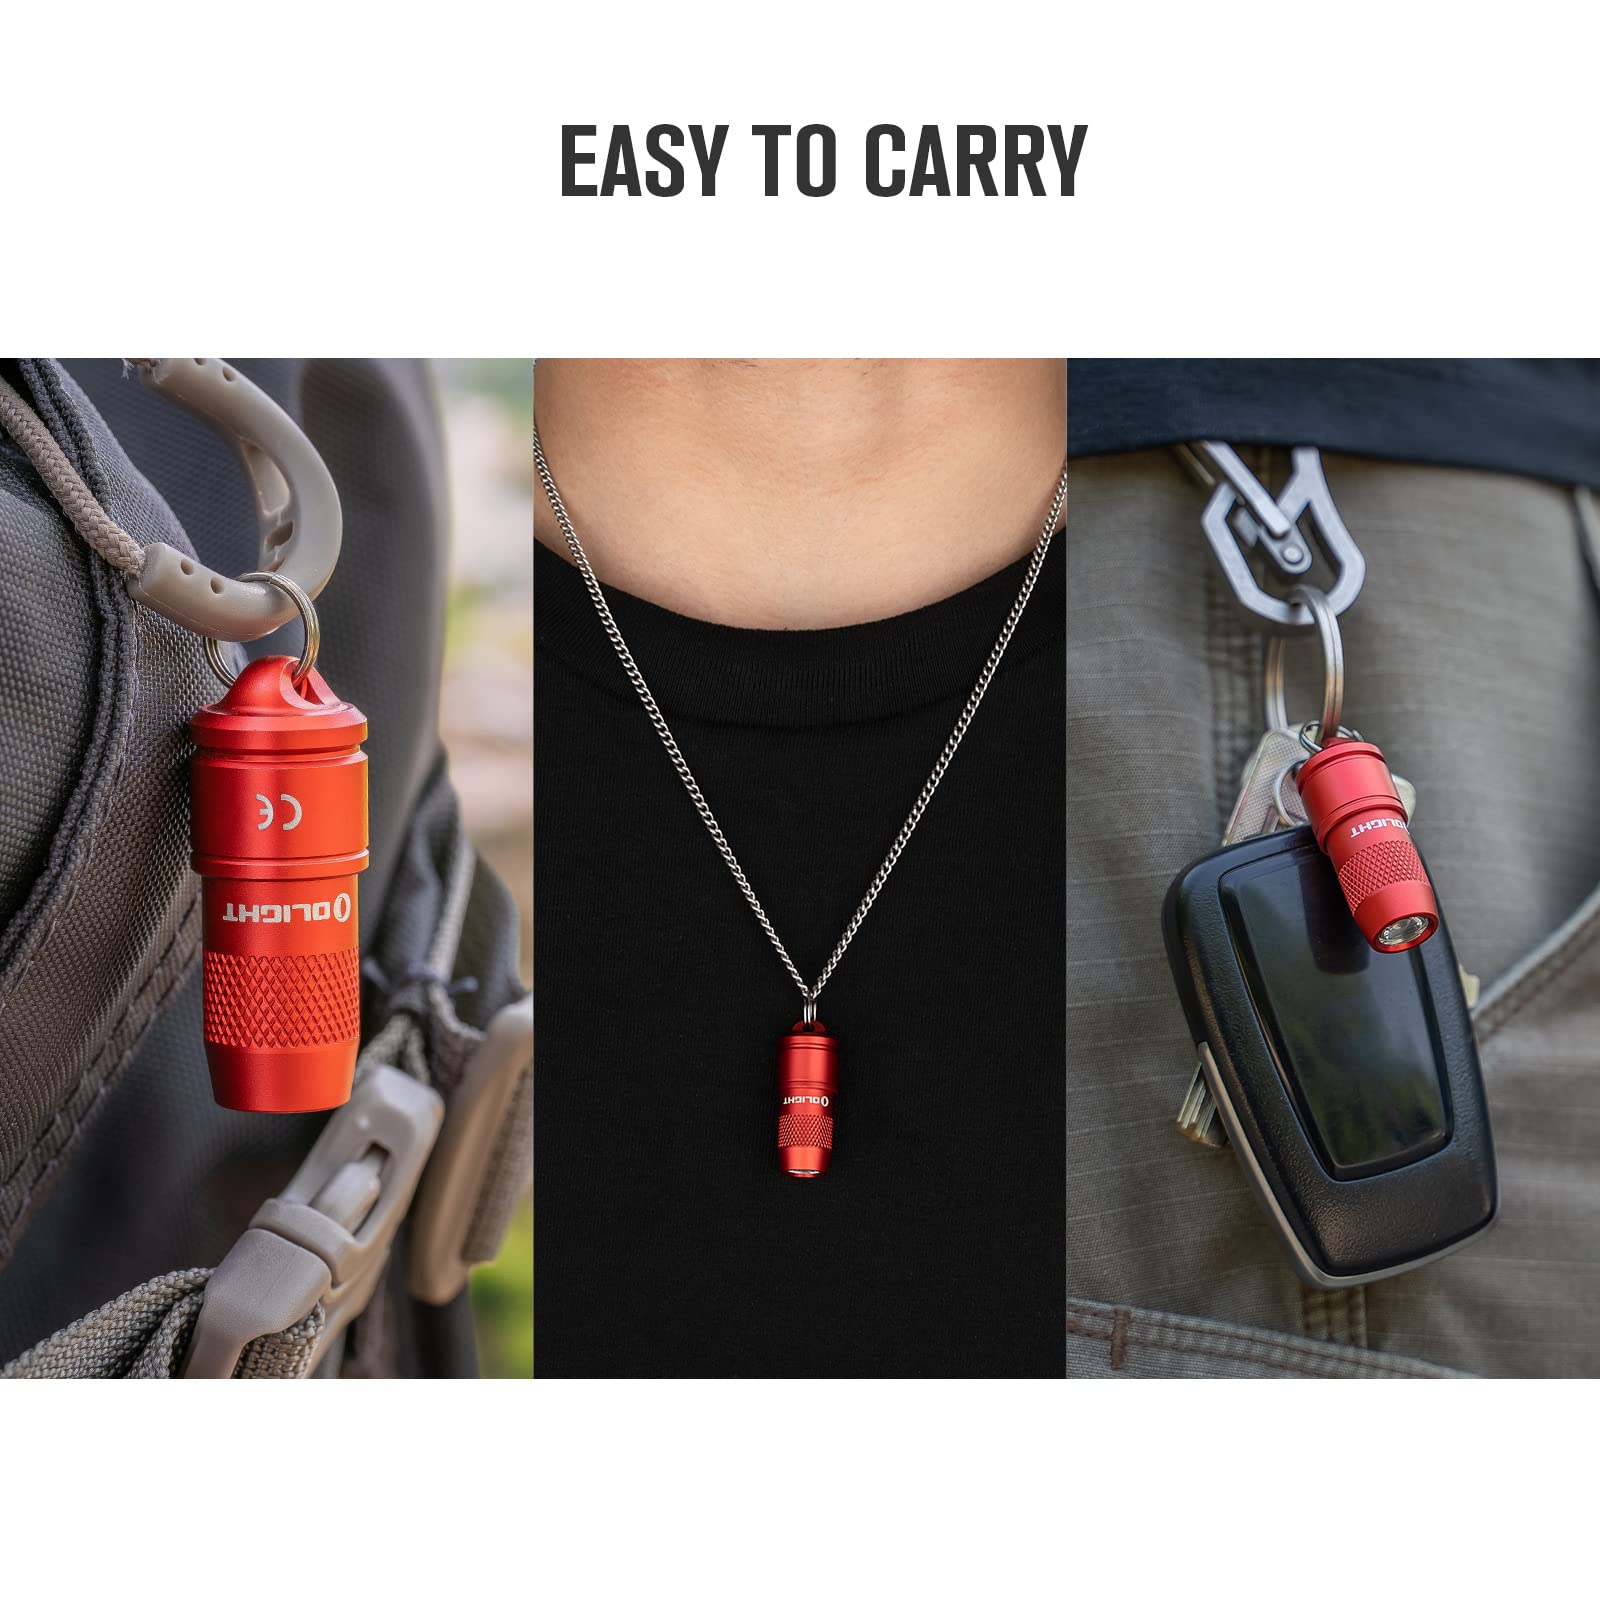 OLIGHT IMINI 10 Lumens Tiny Keychain Flashlight, Portable Quick-Release Small Flashlights with Magnetic Base, Powered by 3 LR41 Button Cells for EDC and Emergency (Red)